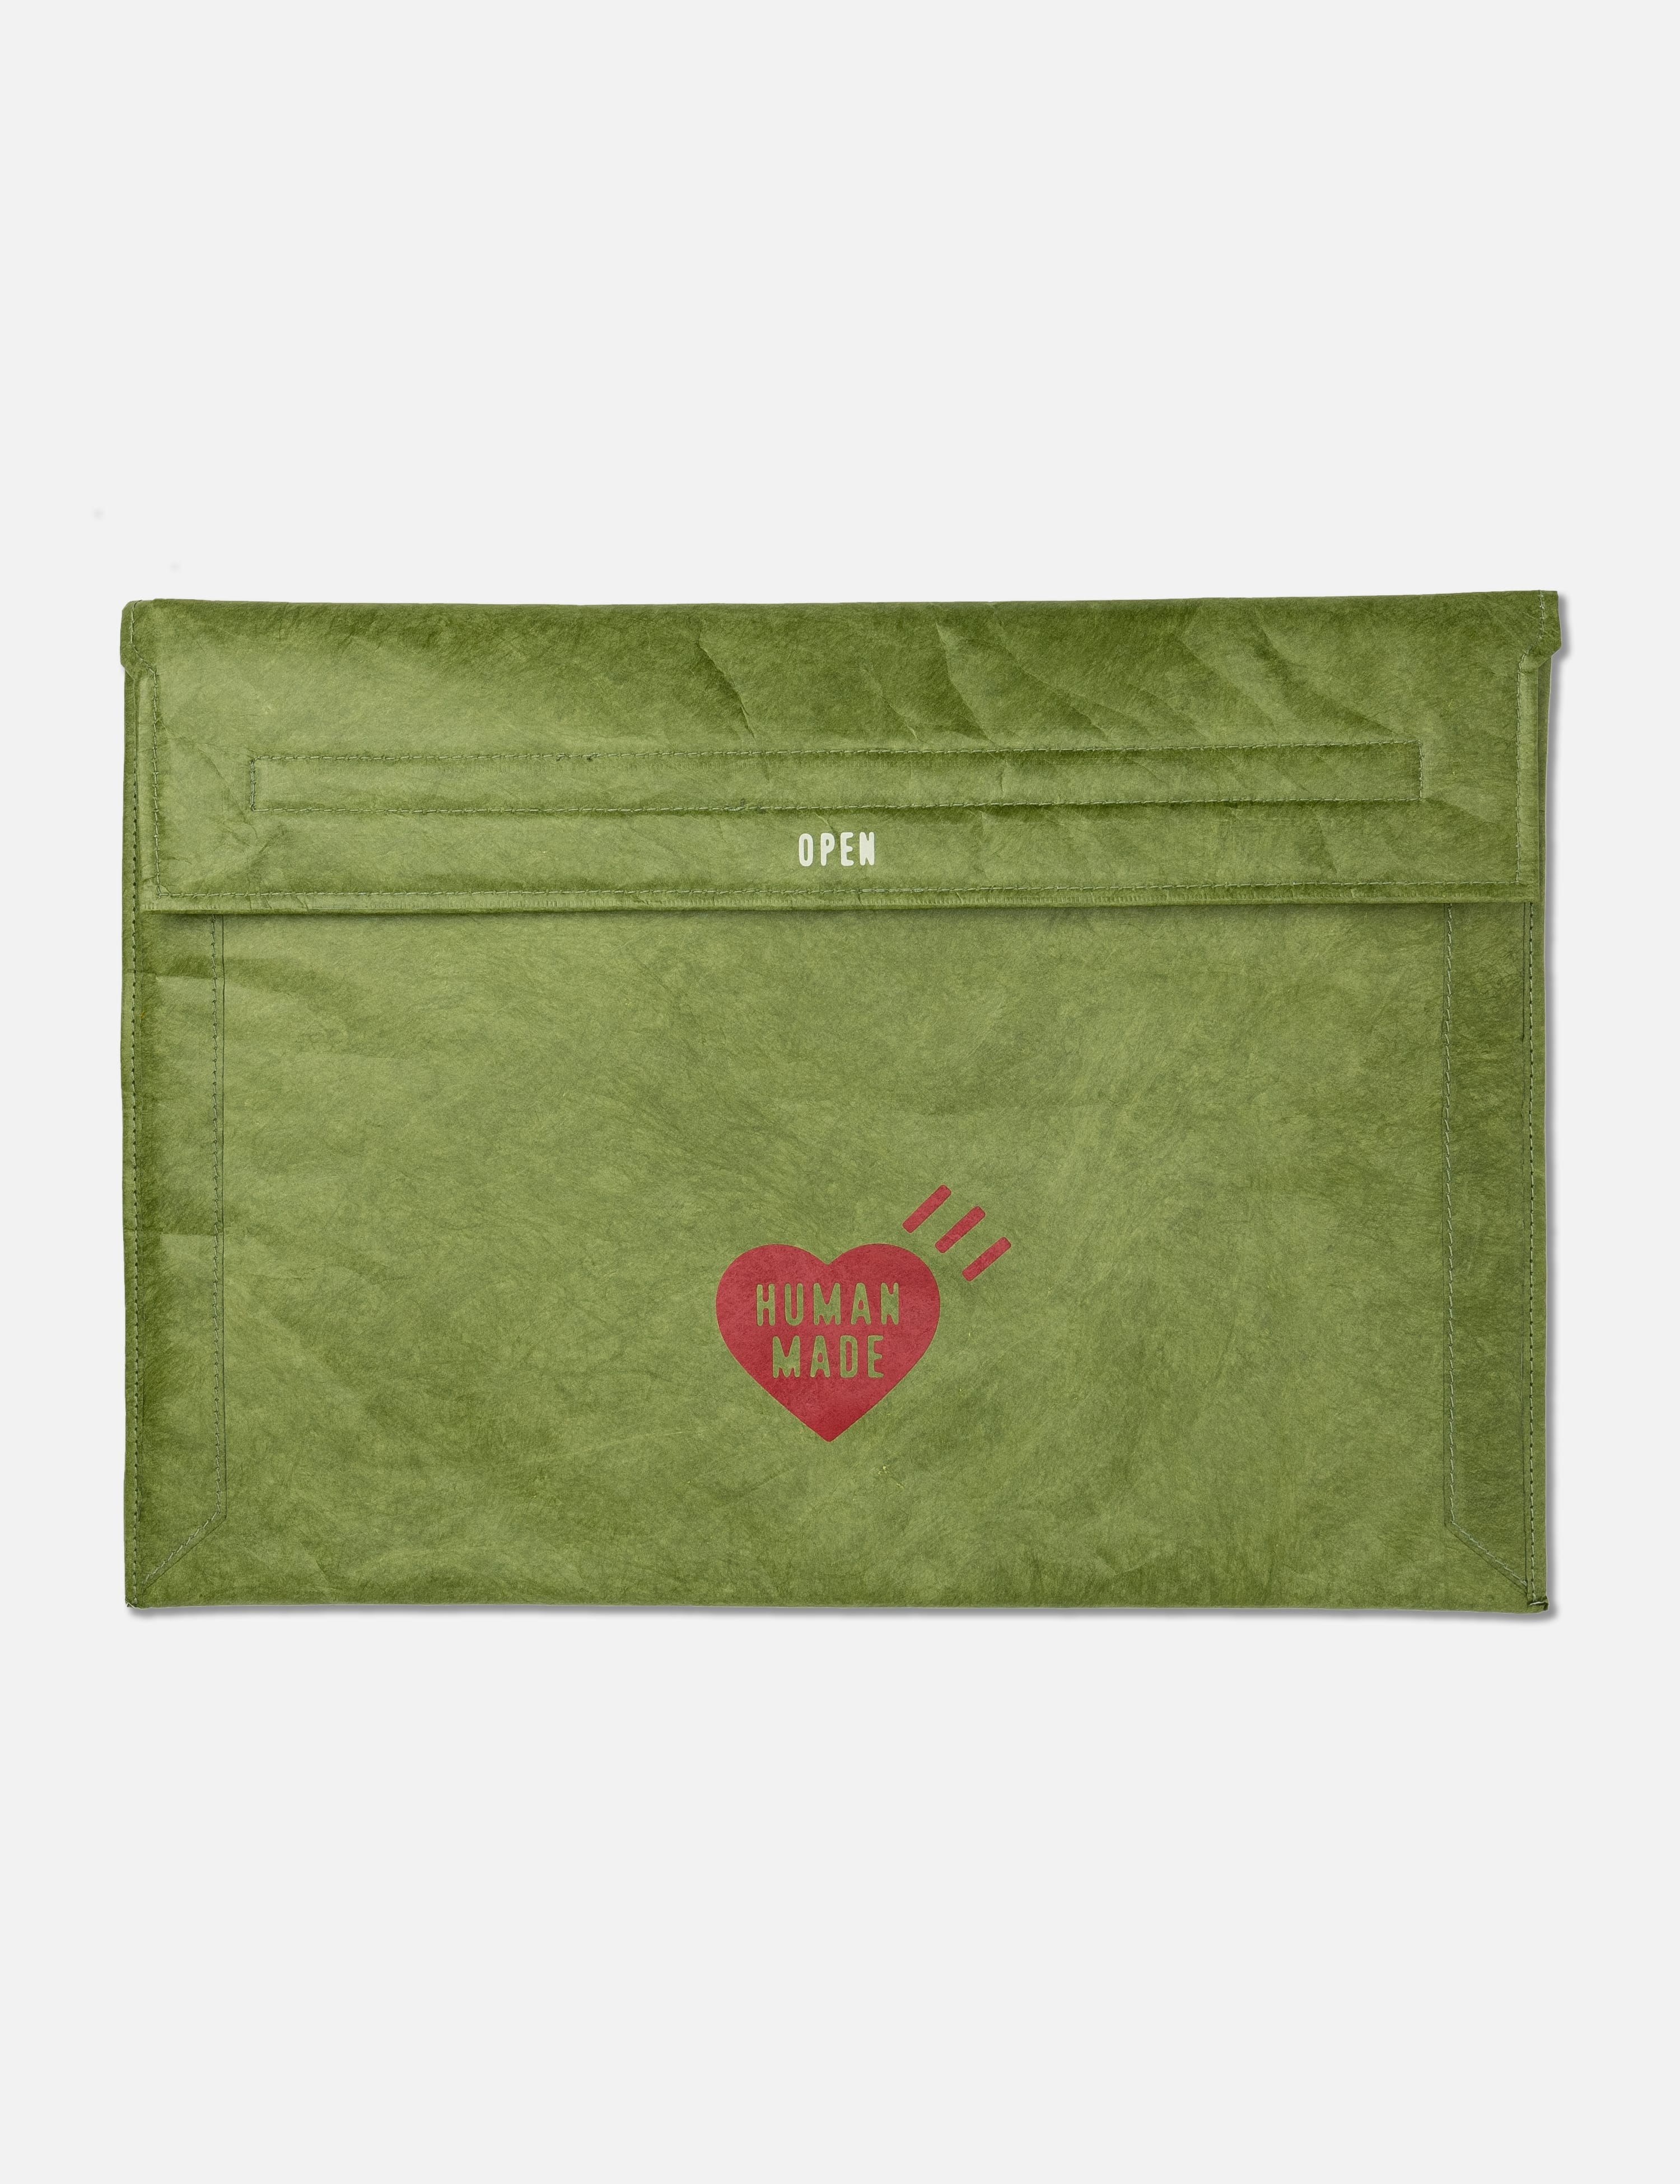 HUMAN MADE PC/TABLET SLEEVE 16INCH